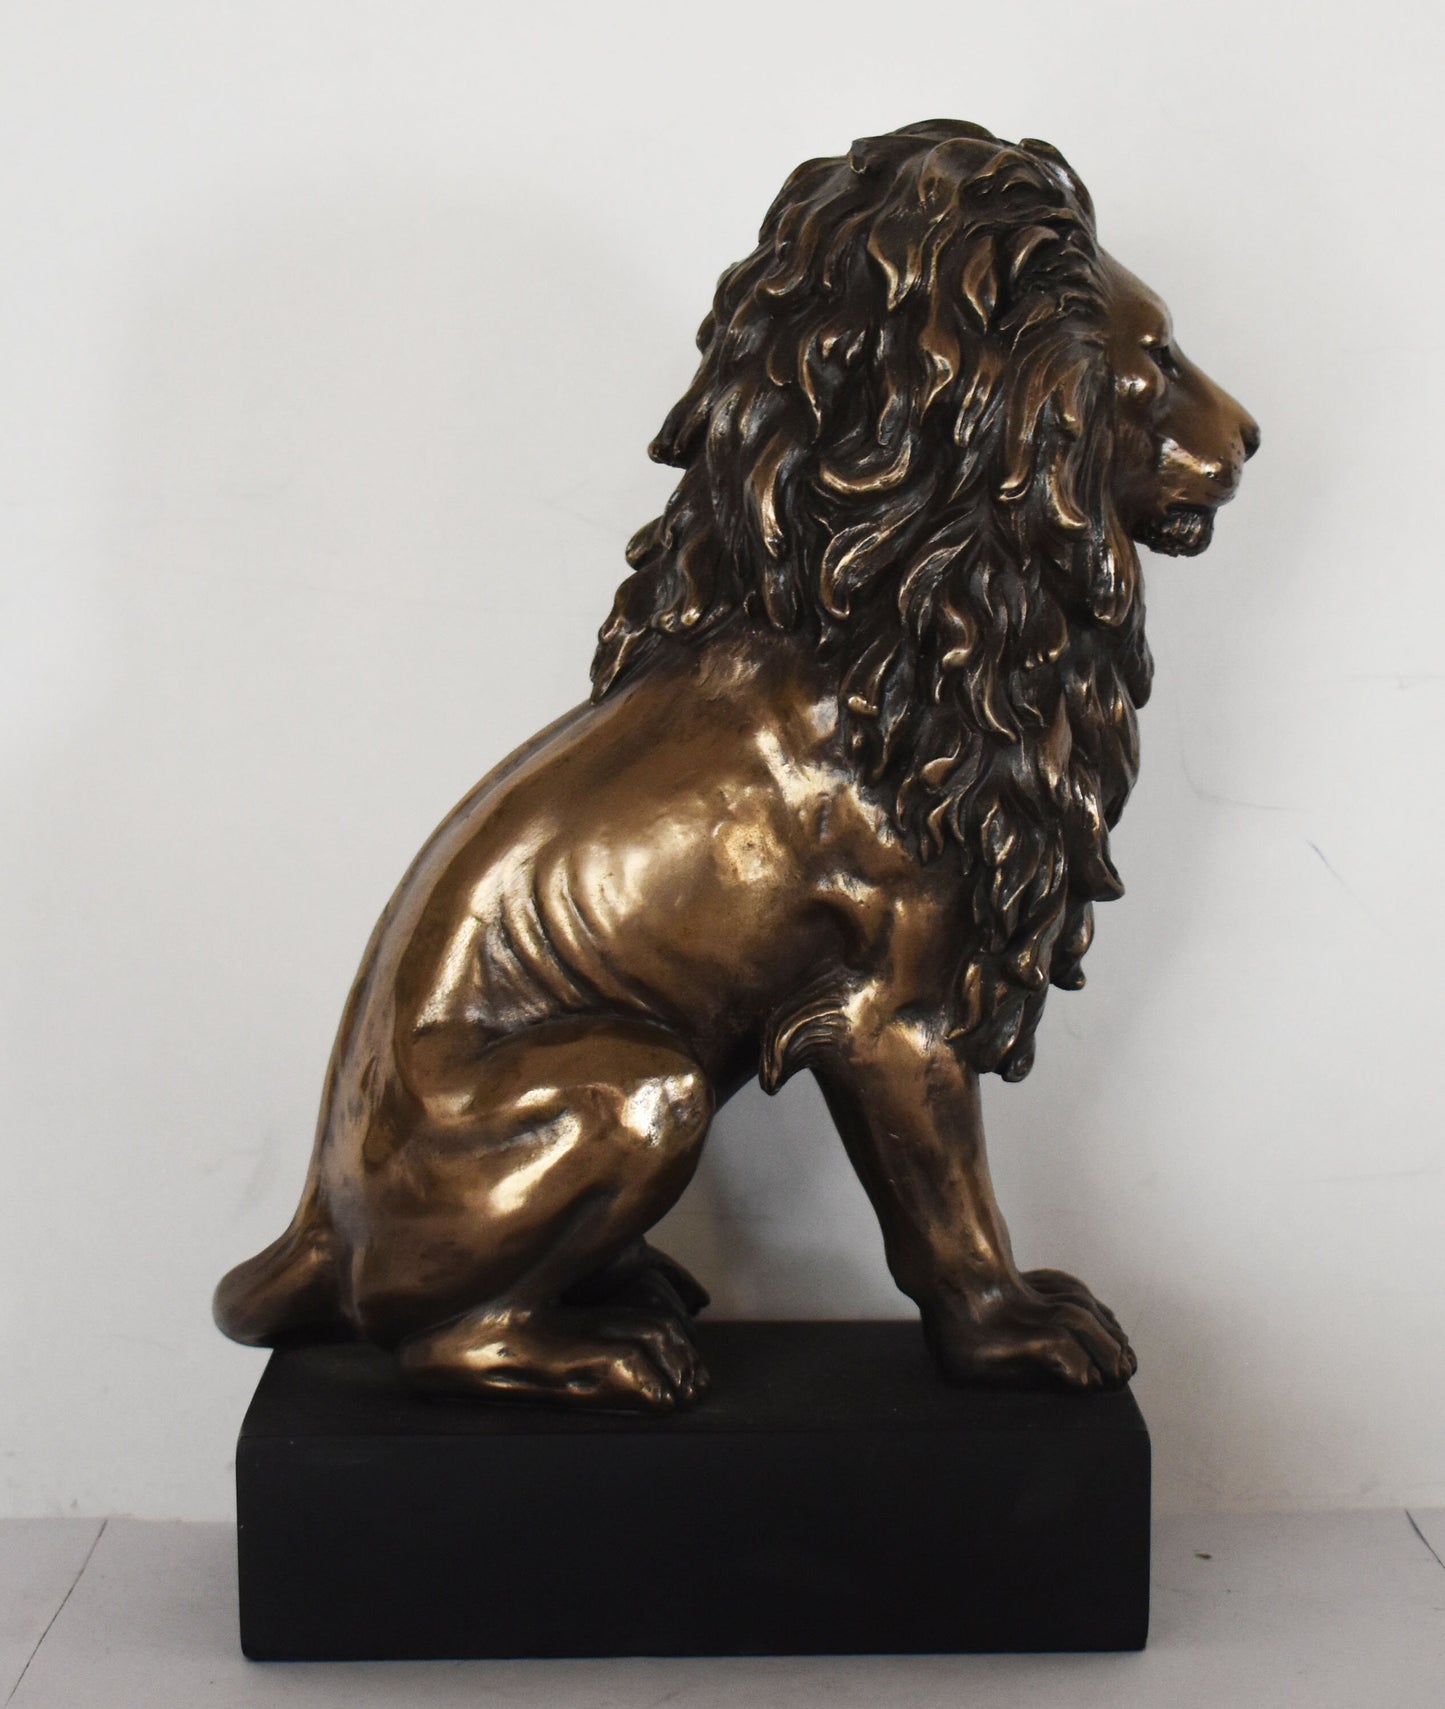 Nemean lion - Hercules' First Labor - Legendary Creature - Offspring of Orthrus and the Chimera - Cold Cast Bronze Resin